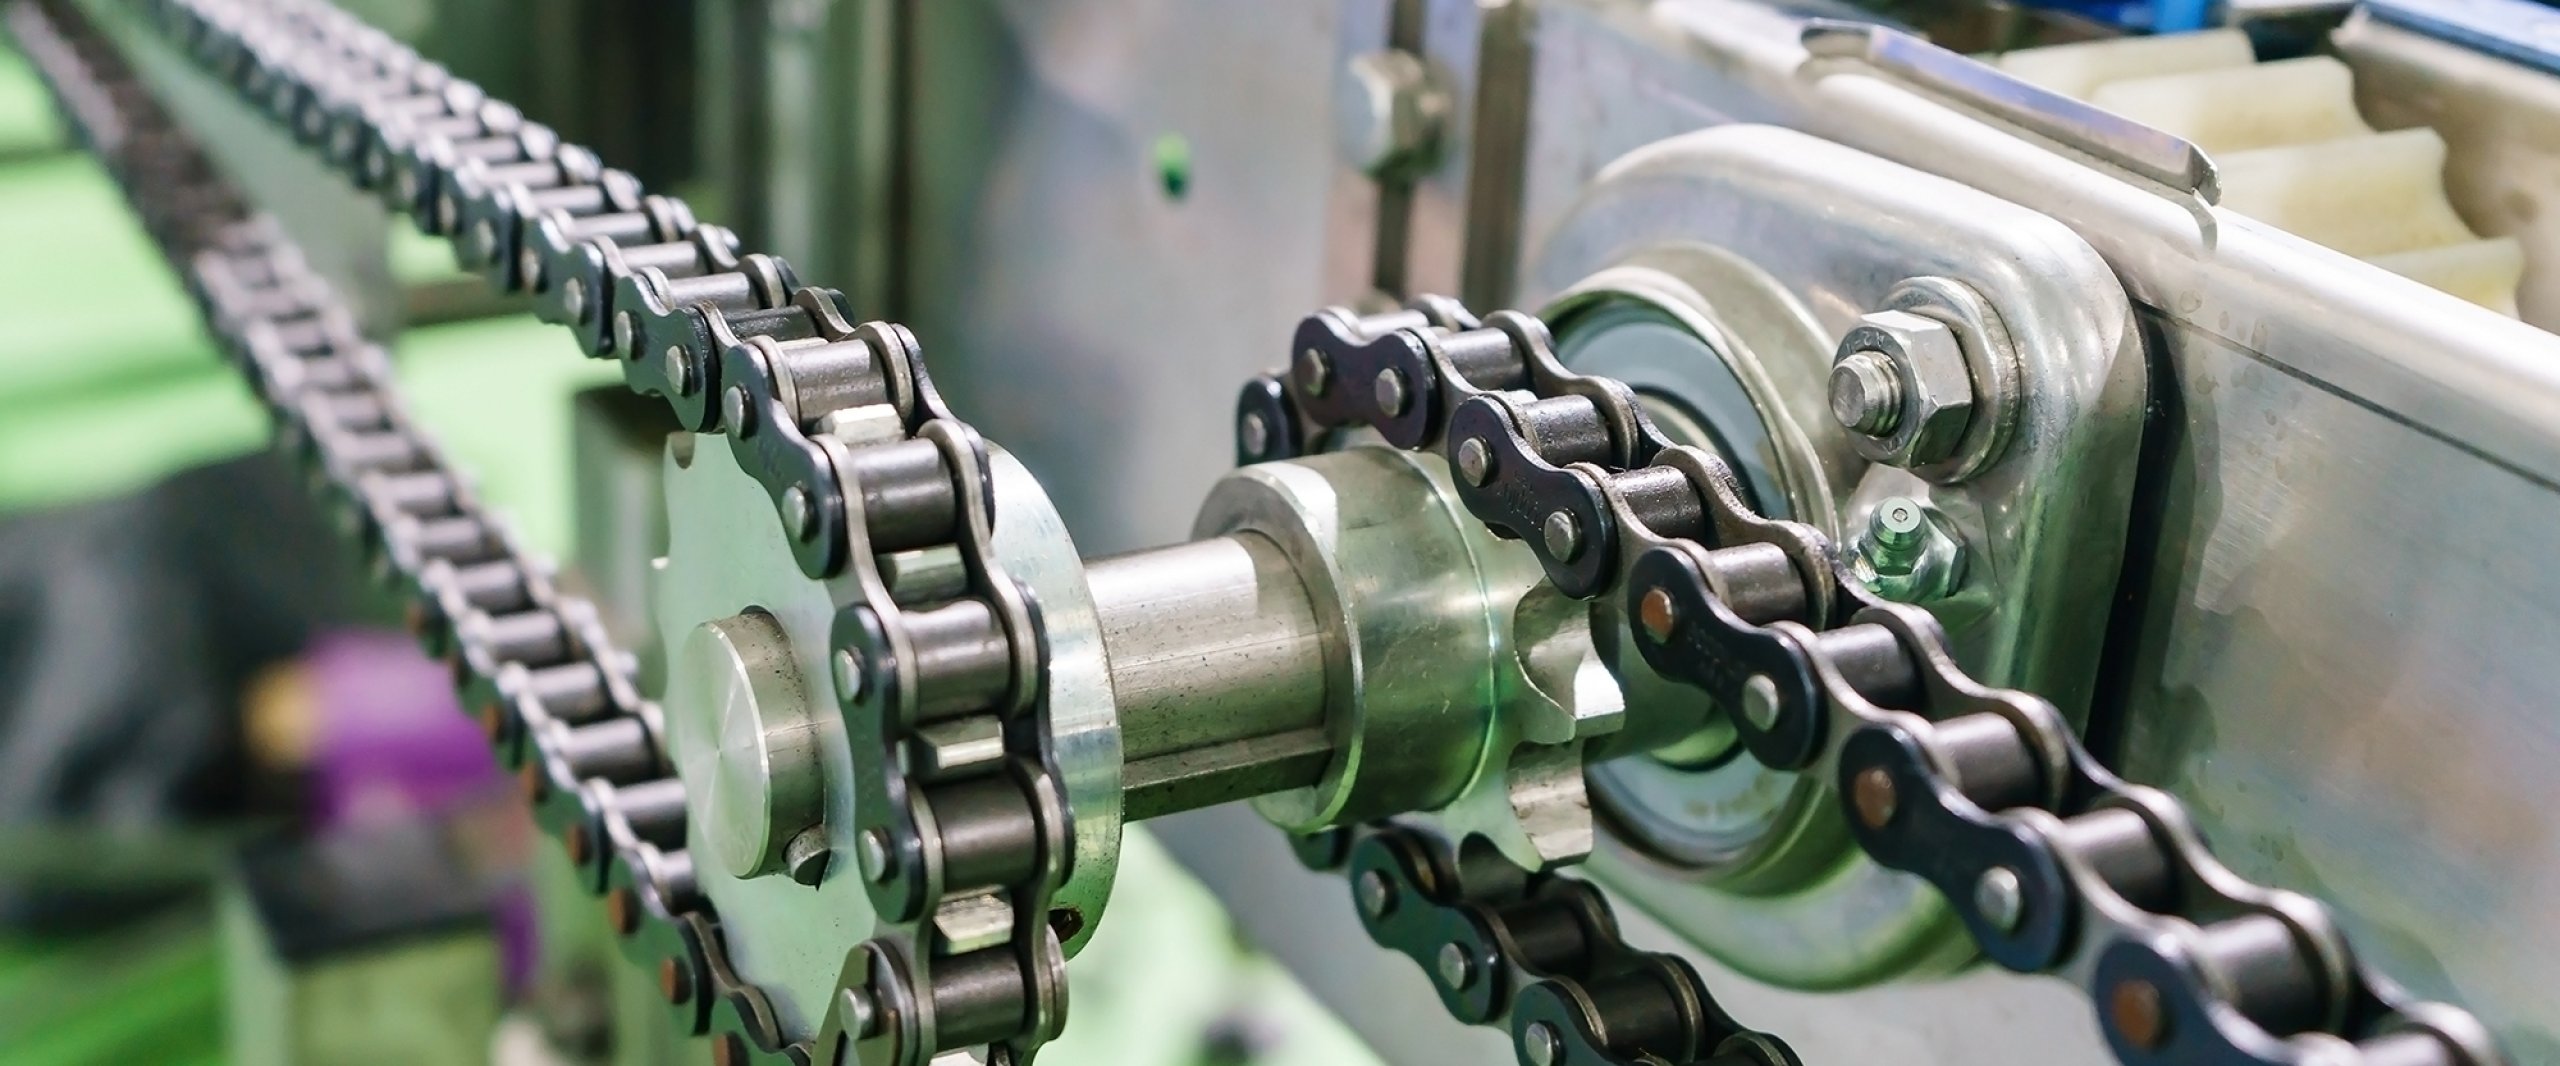 Gear and chain drive shaft in conveyor chain and conveyor belt is on production line_Quelle: shutterstock_793083277_Navin Tar